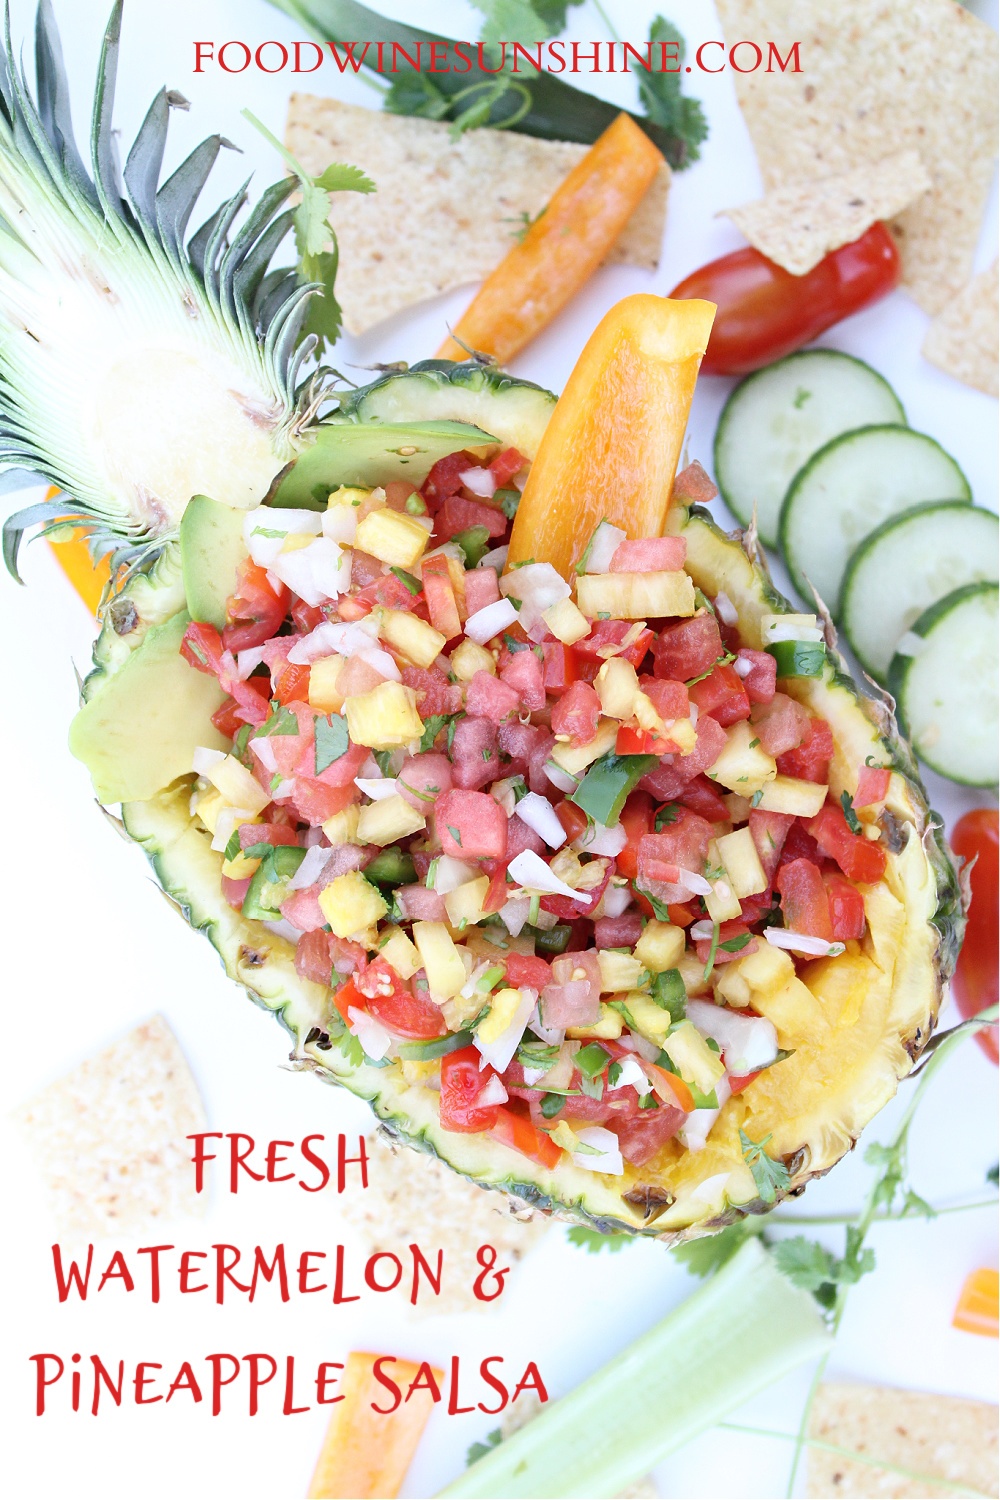 Best Watermelon and Pineapple Salsa